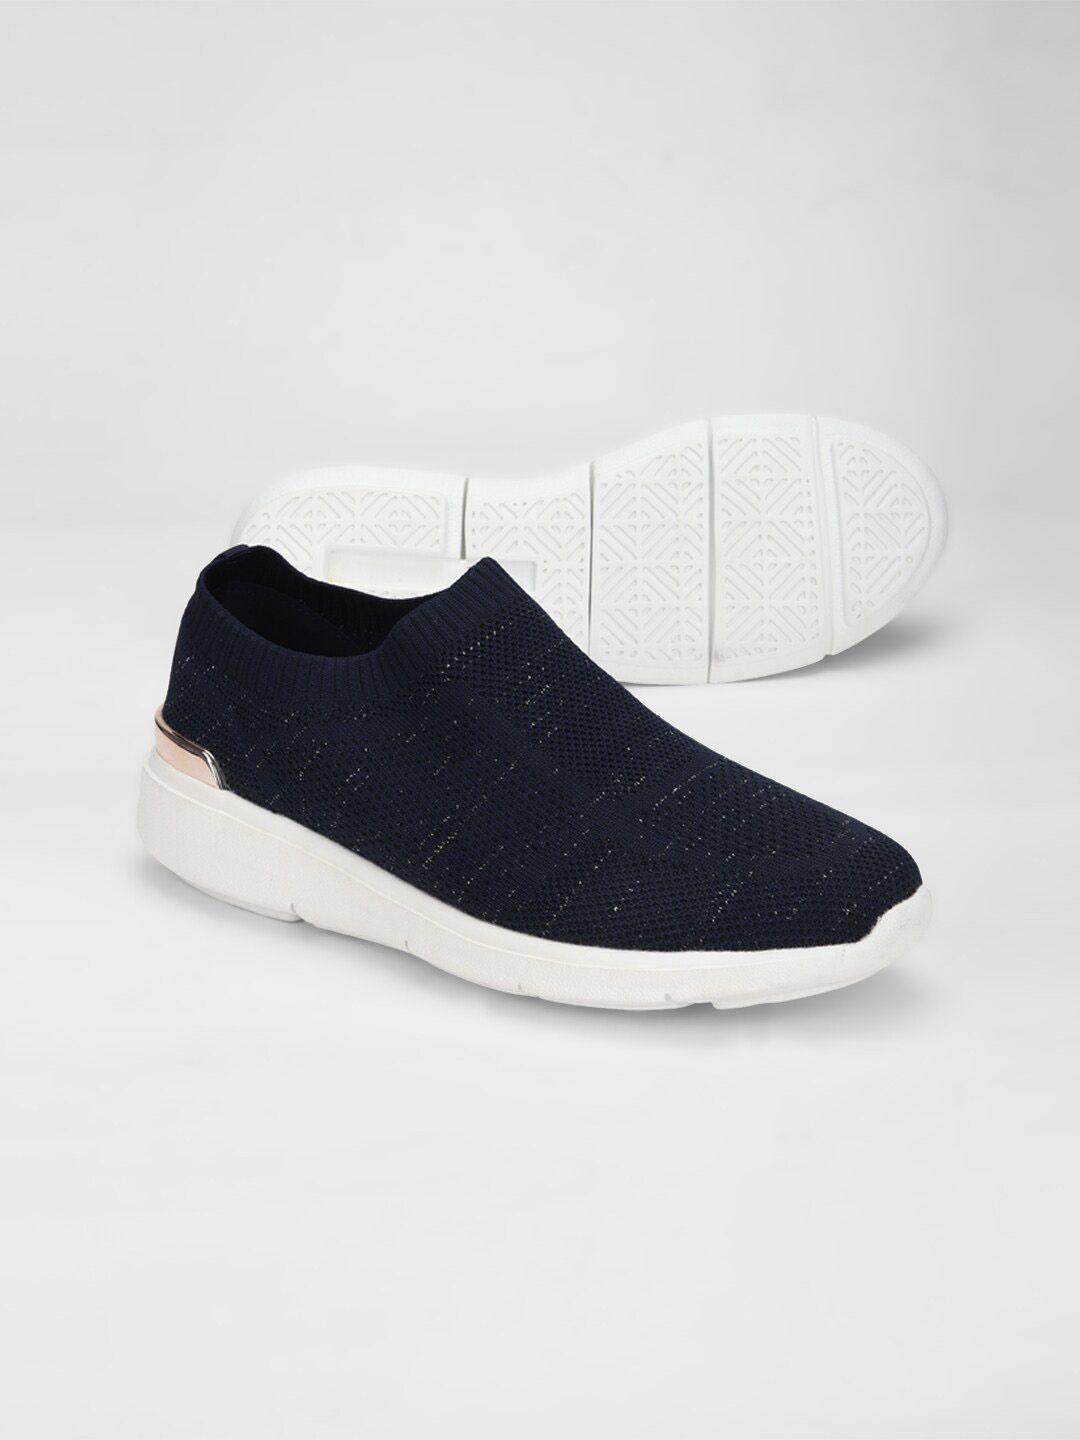 Allen Solly Woman Women Navy Blue Woven Design PU Slip-On Sneakers Price in India